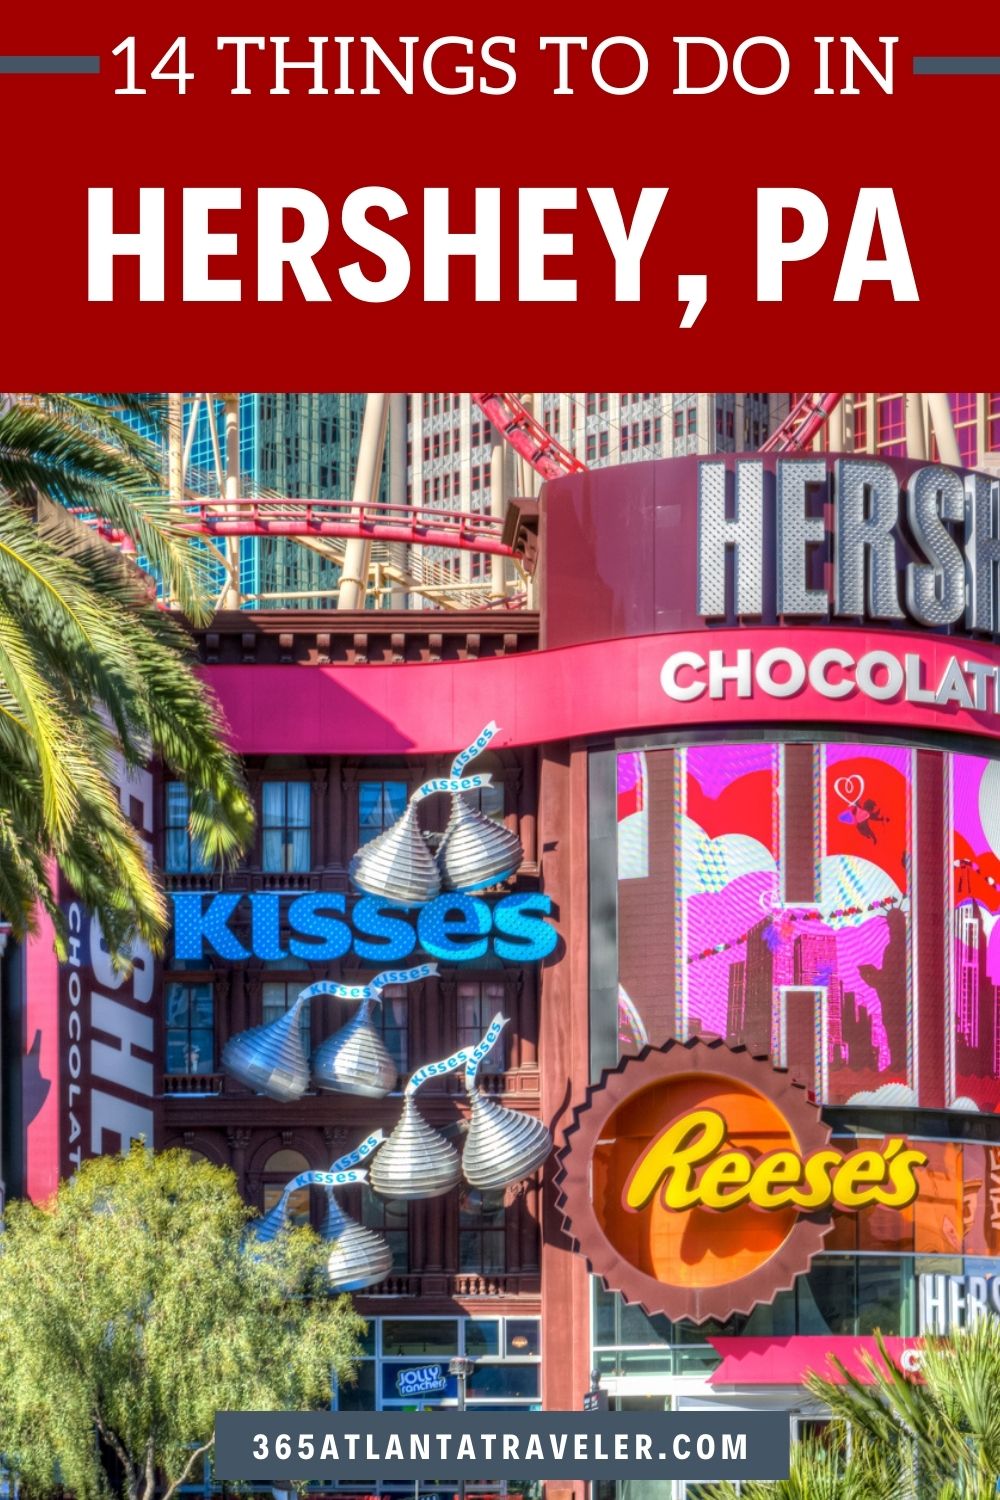 14 YUMMY THINGS TO DO IN HERSHEY PA YOU'LL LOVE